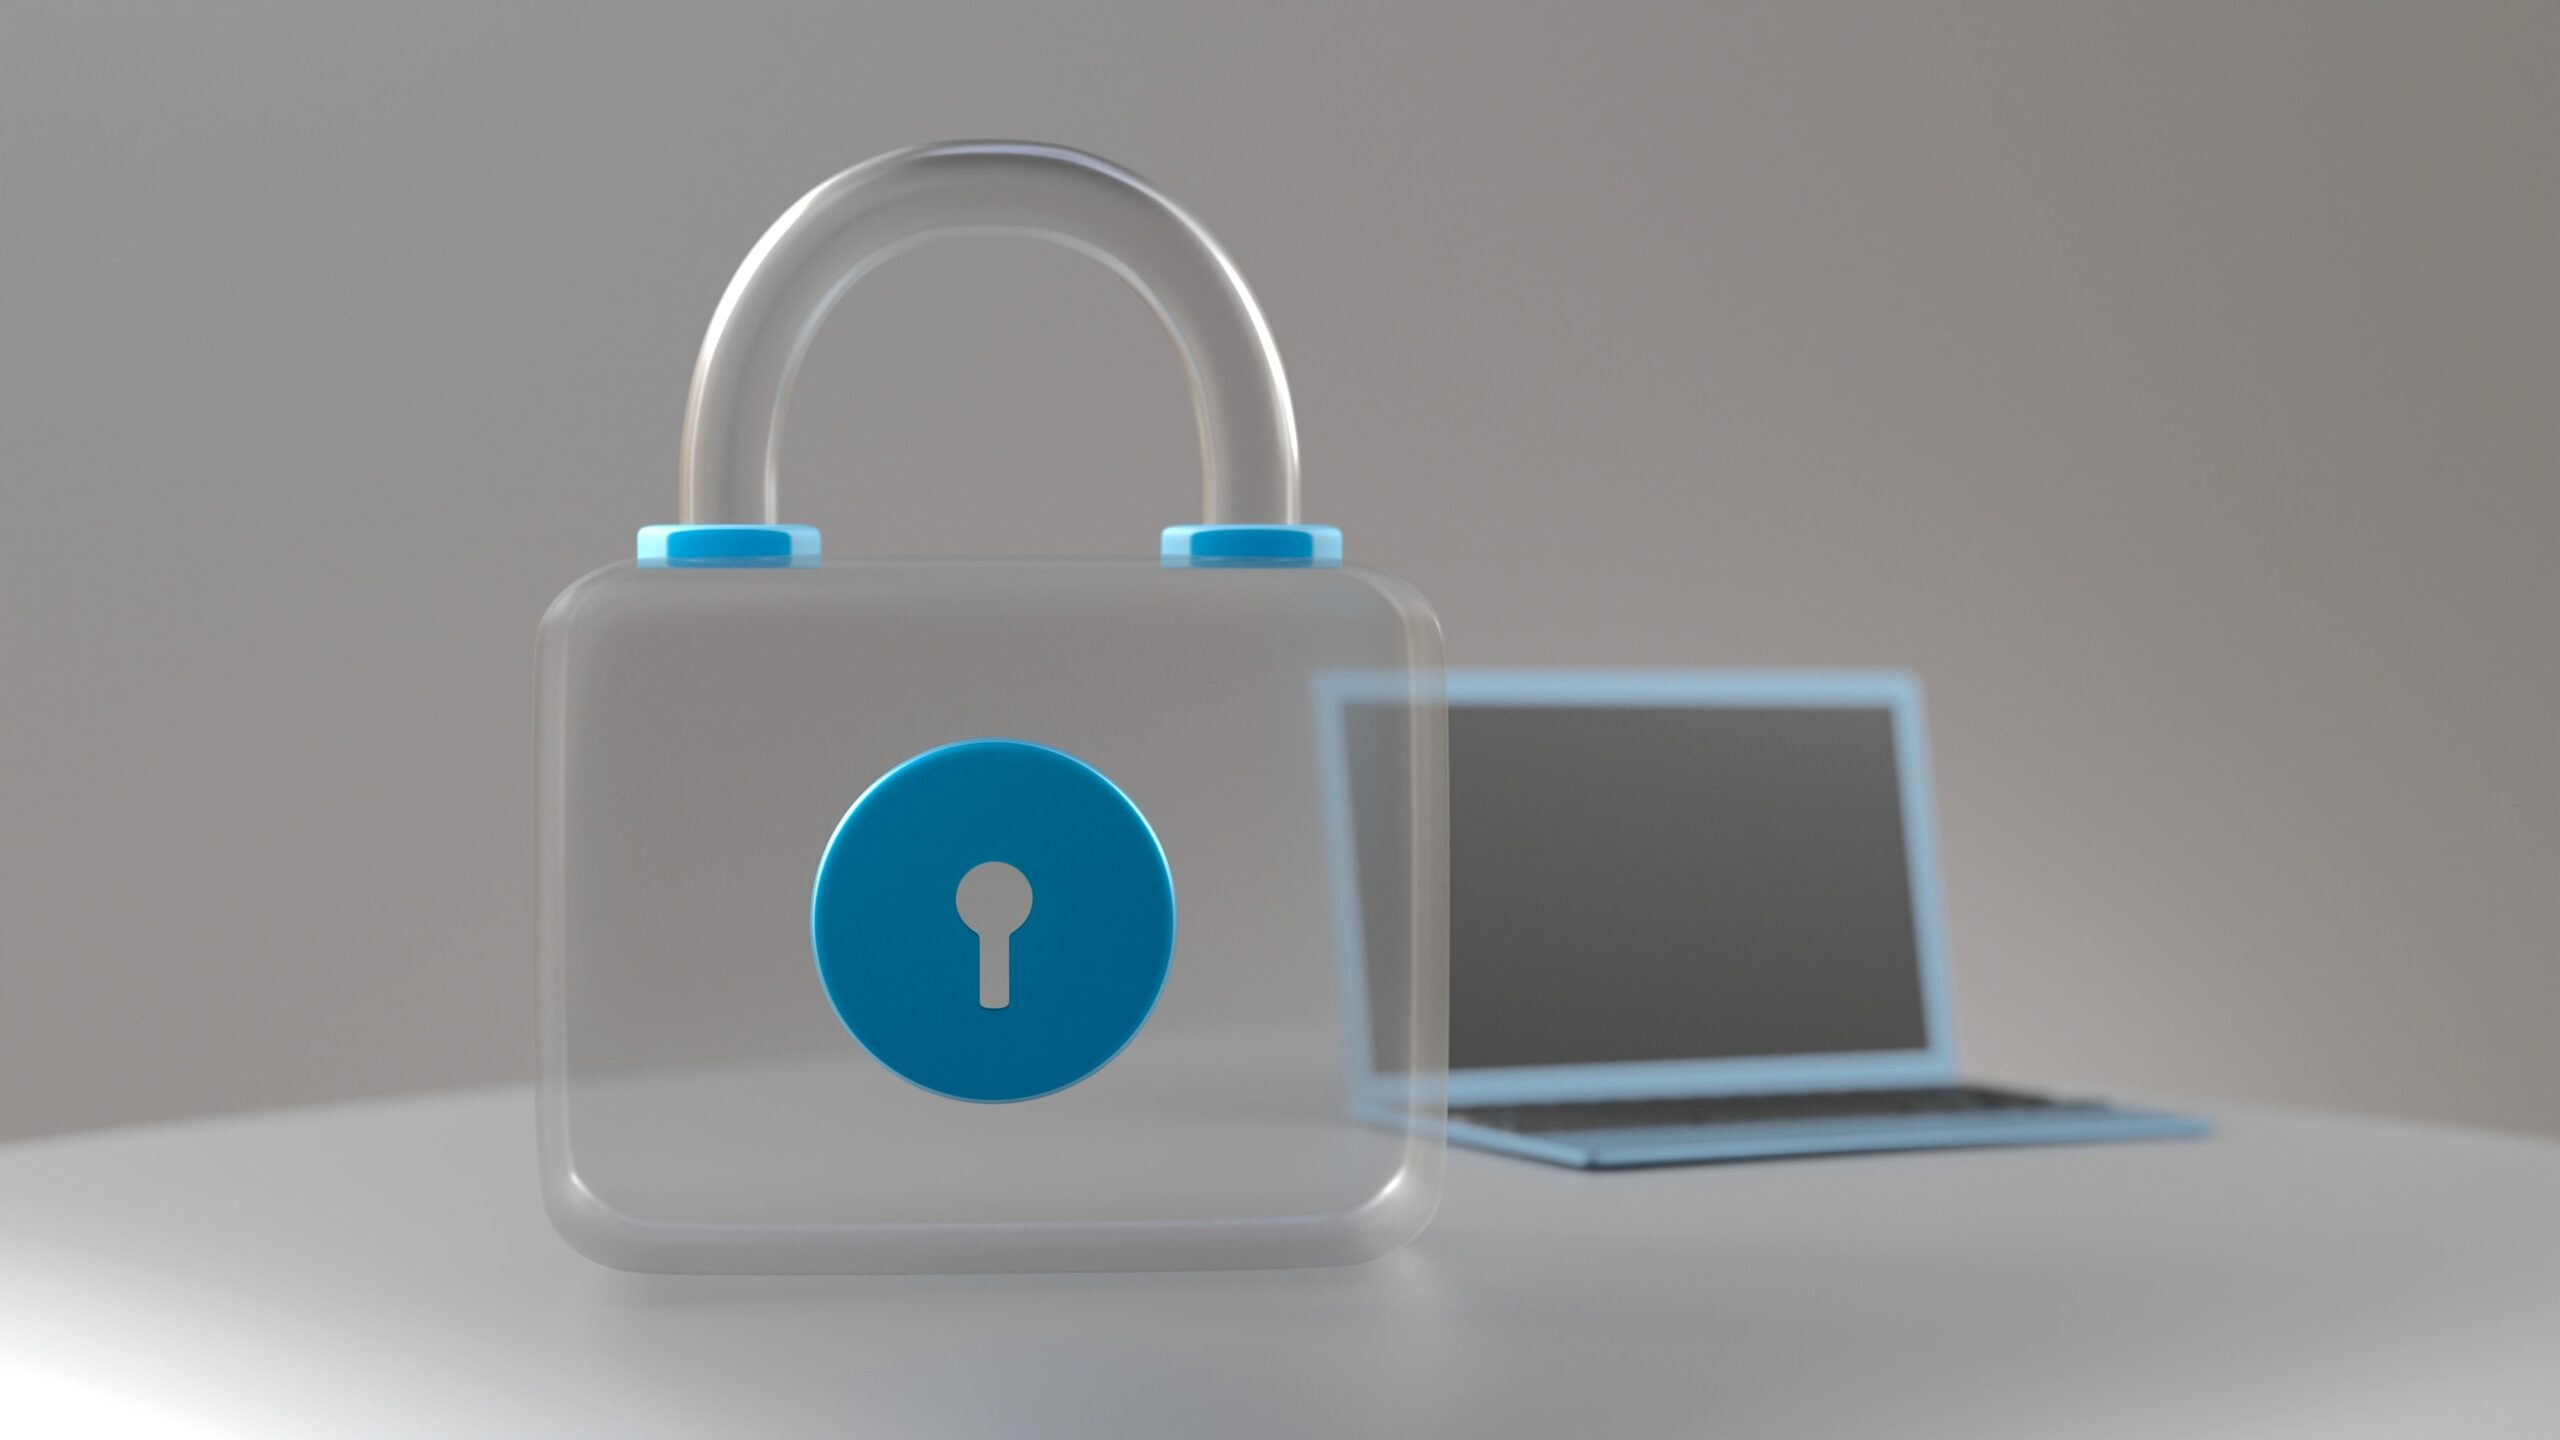 A padlock on a table next to a Microsoft laptop, symbolizing the need to reset passwords for security.